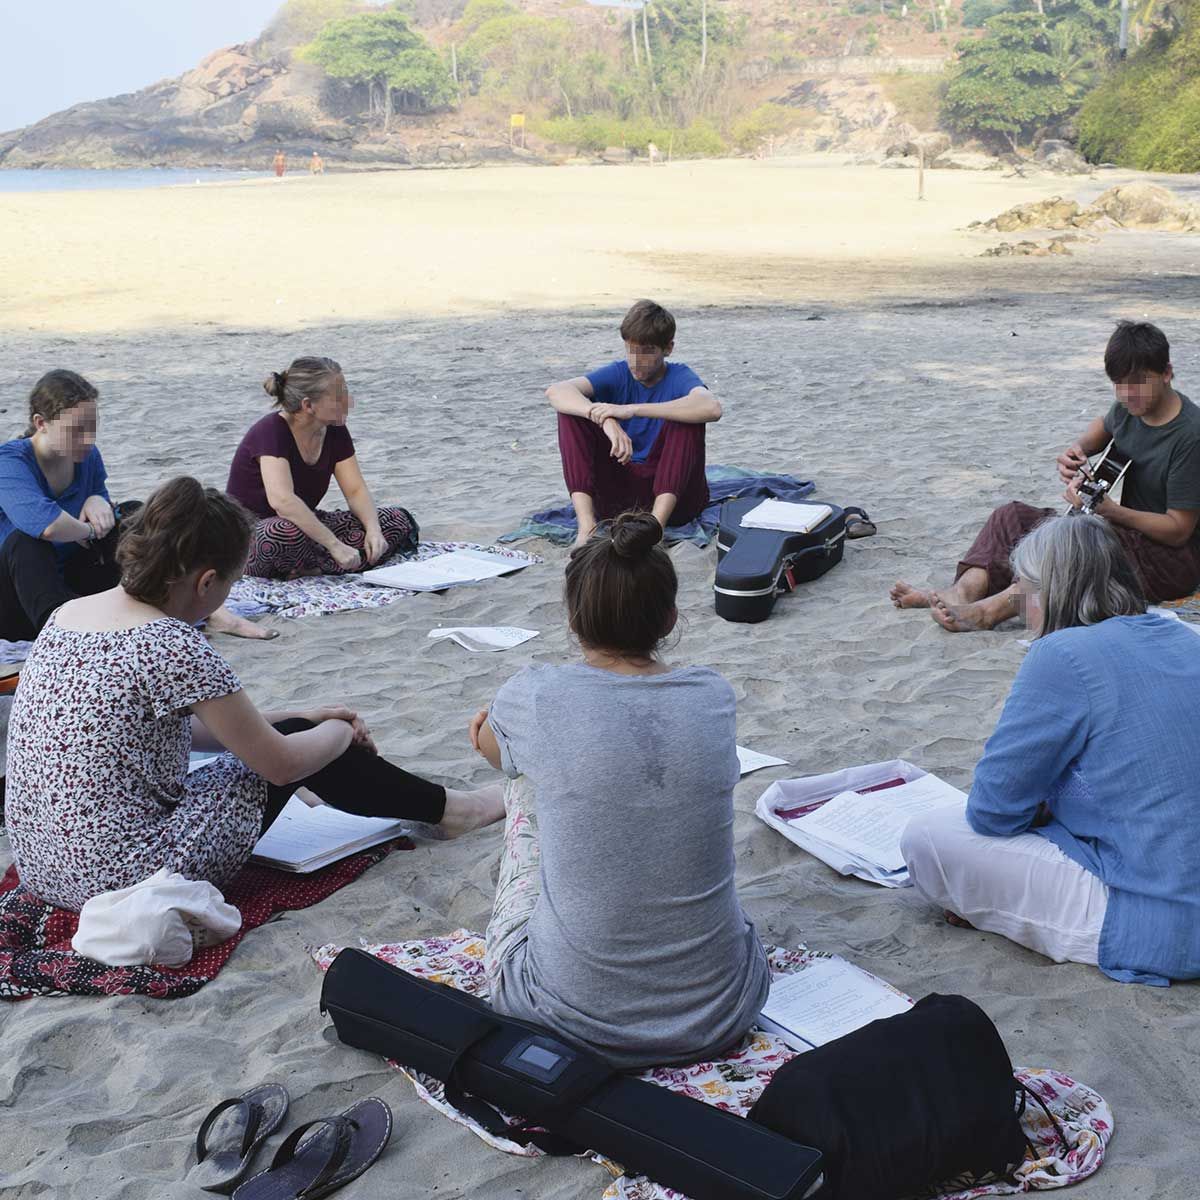 Image: Meeting At the Beach